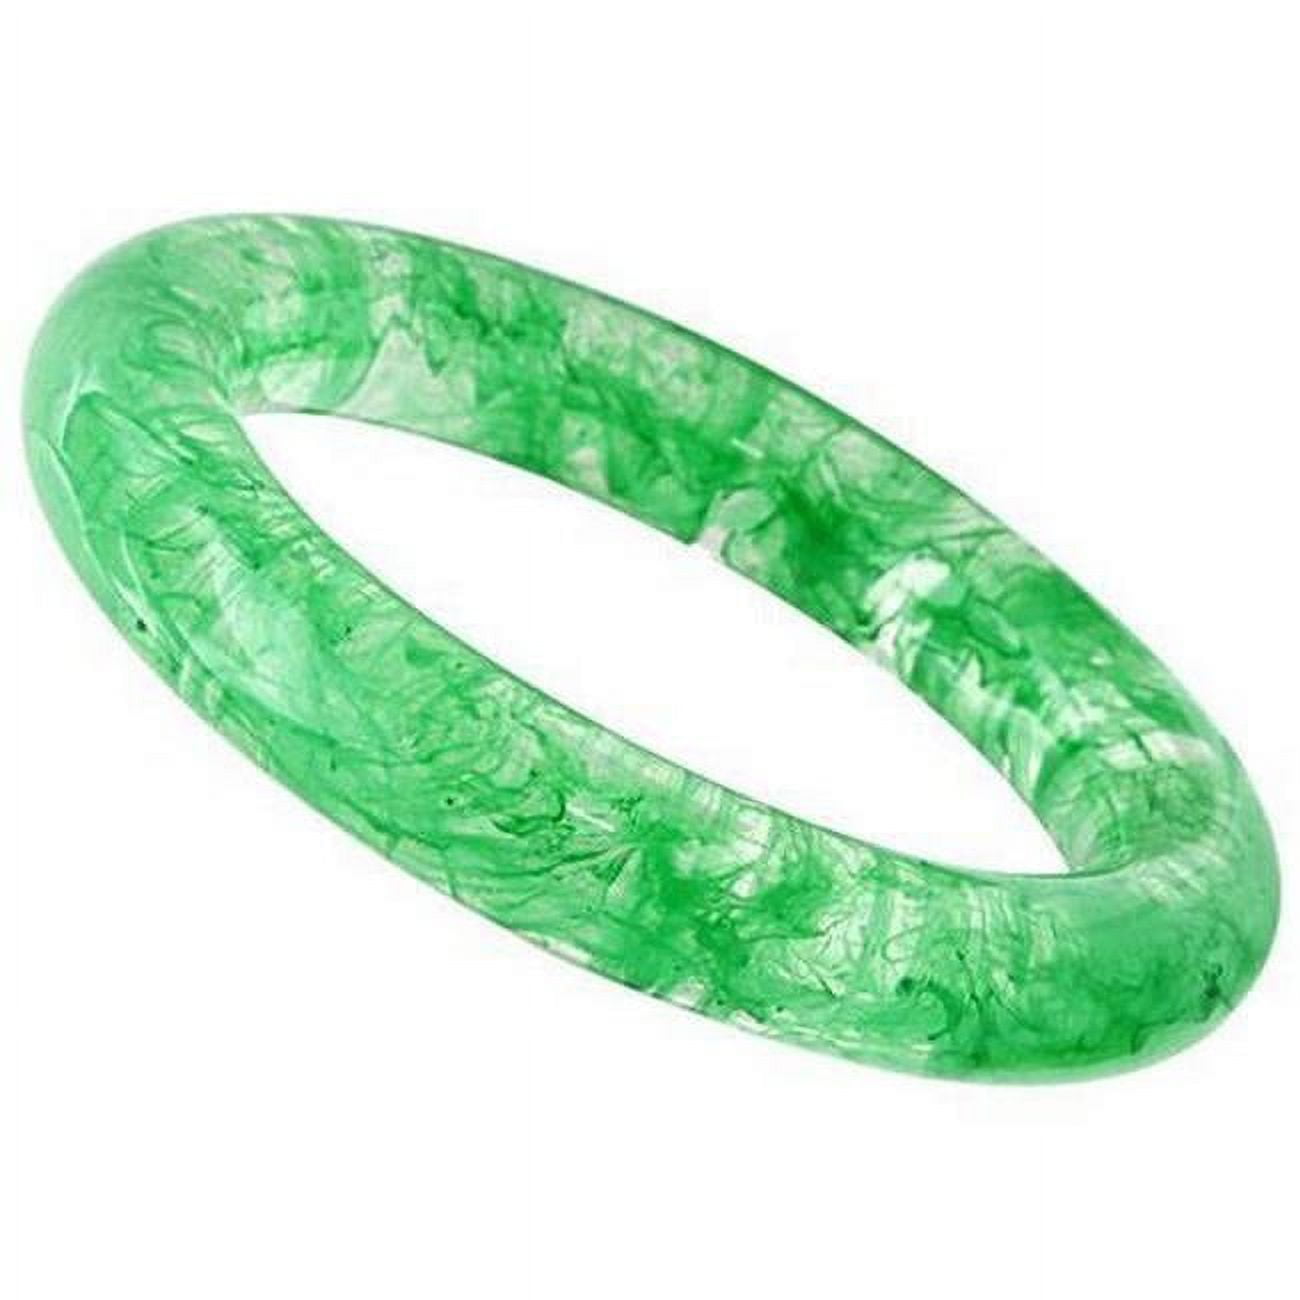 Picture of Alamode VL051-7.25 7.25 in. Resin Bangle with No Stone, Emerald